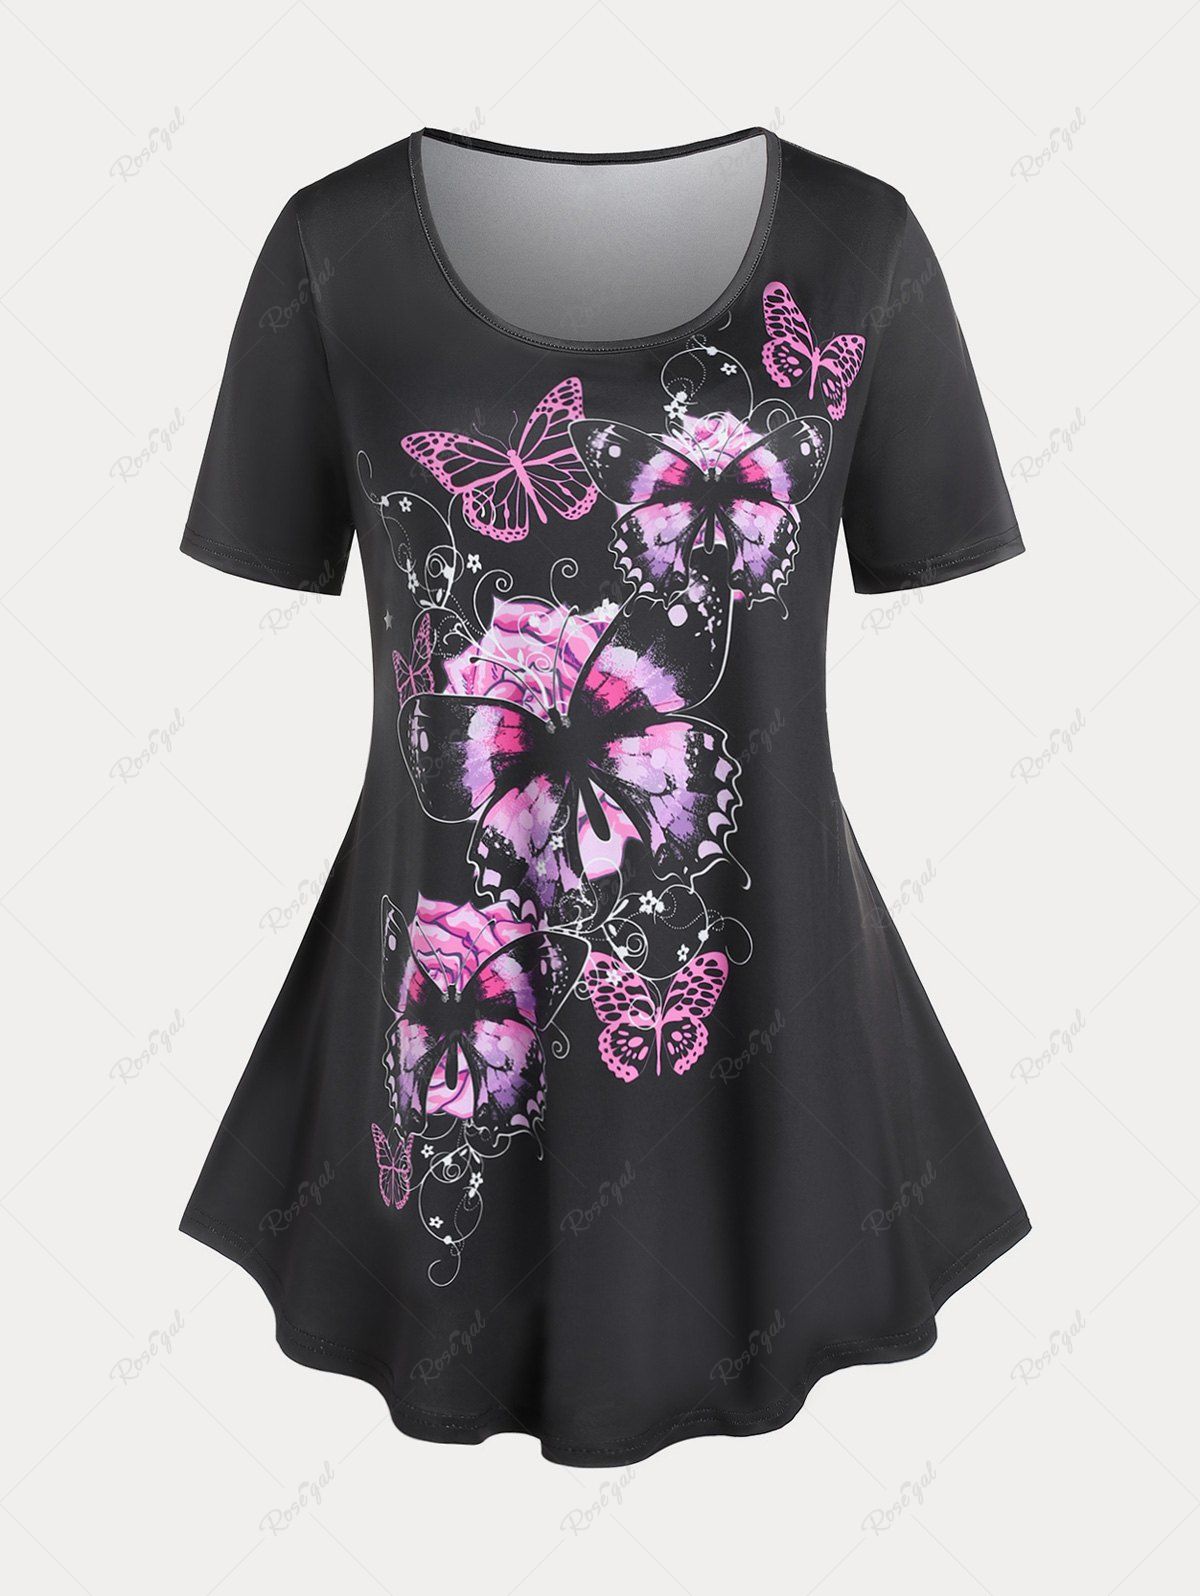 Latest Floral Butterfly Print Plus Size Tunic T-shirt  